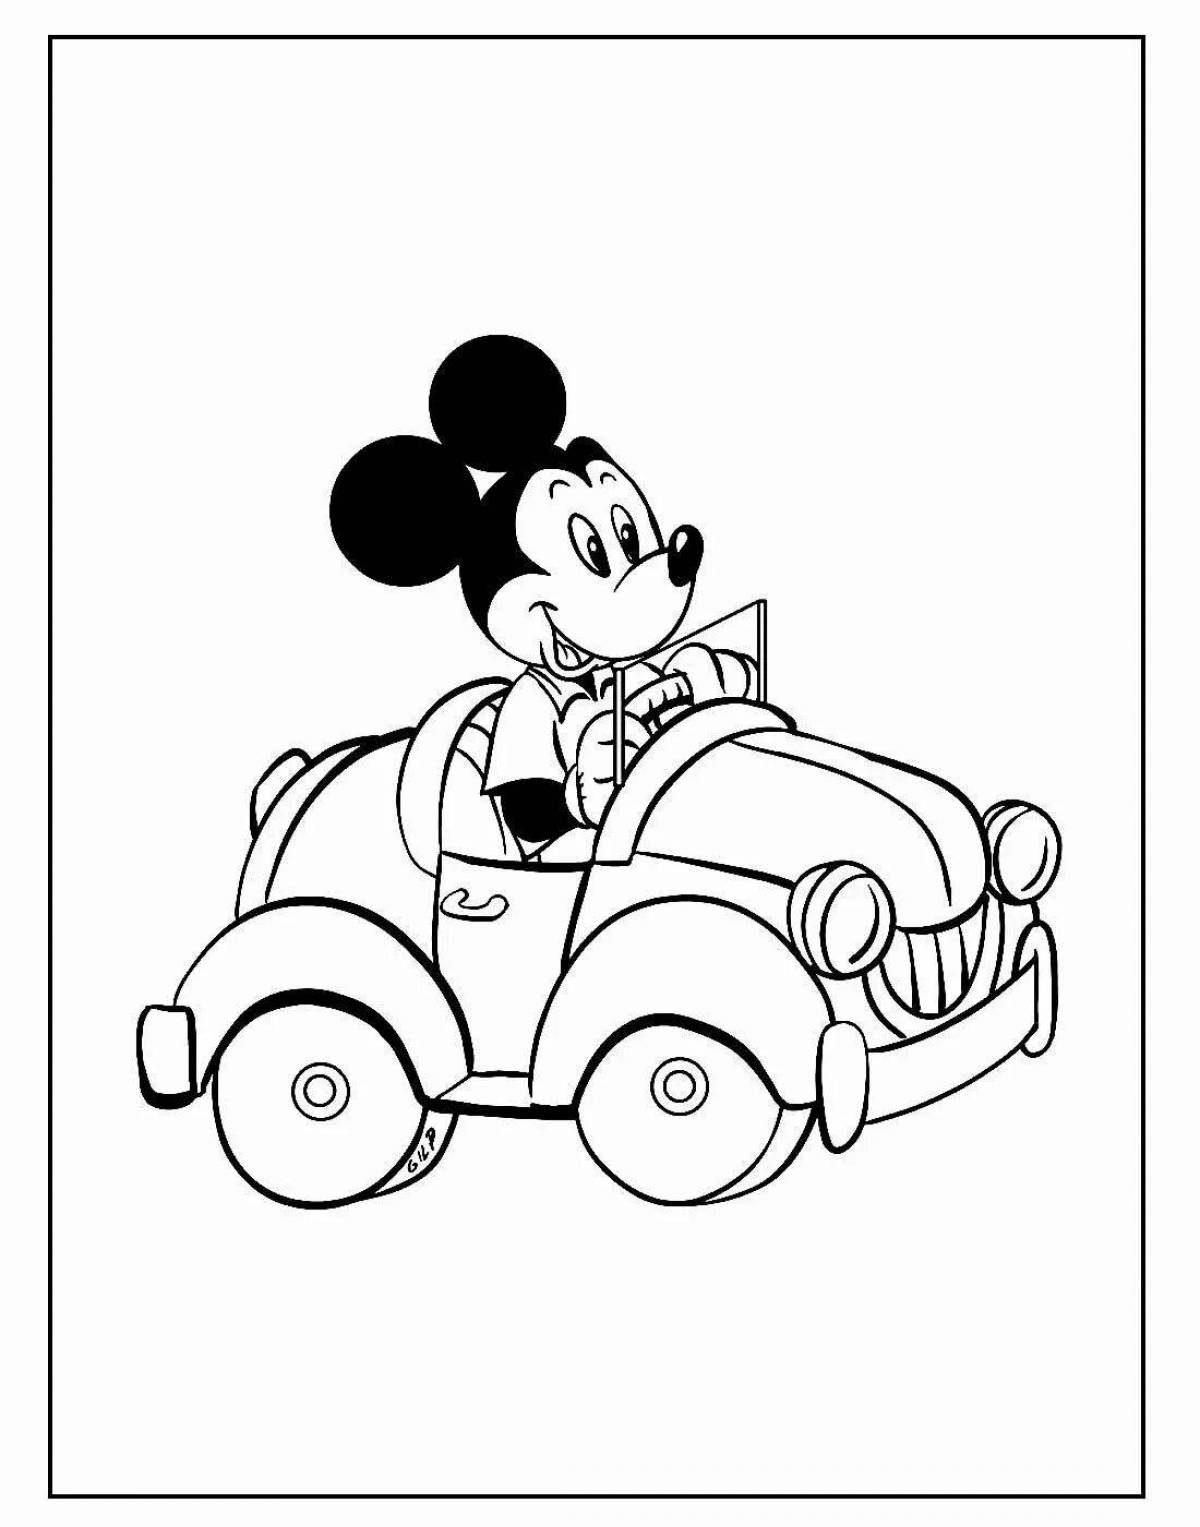 Mickey mouse bright coloring for boys